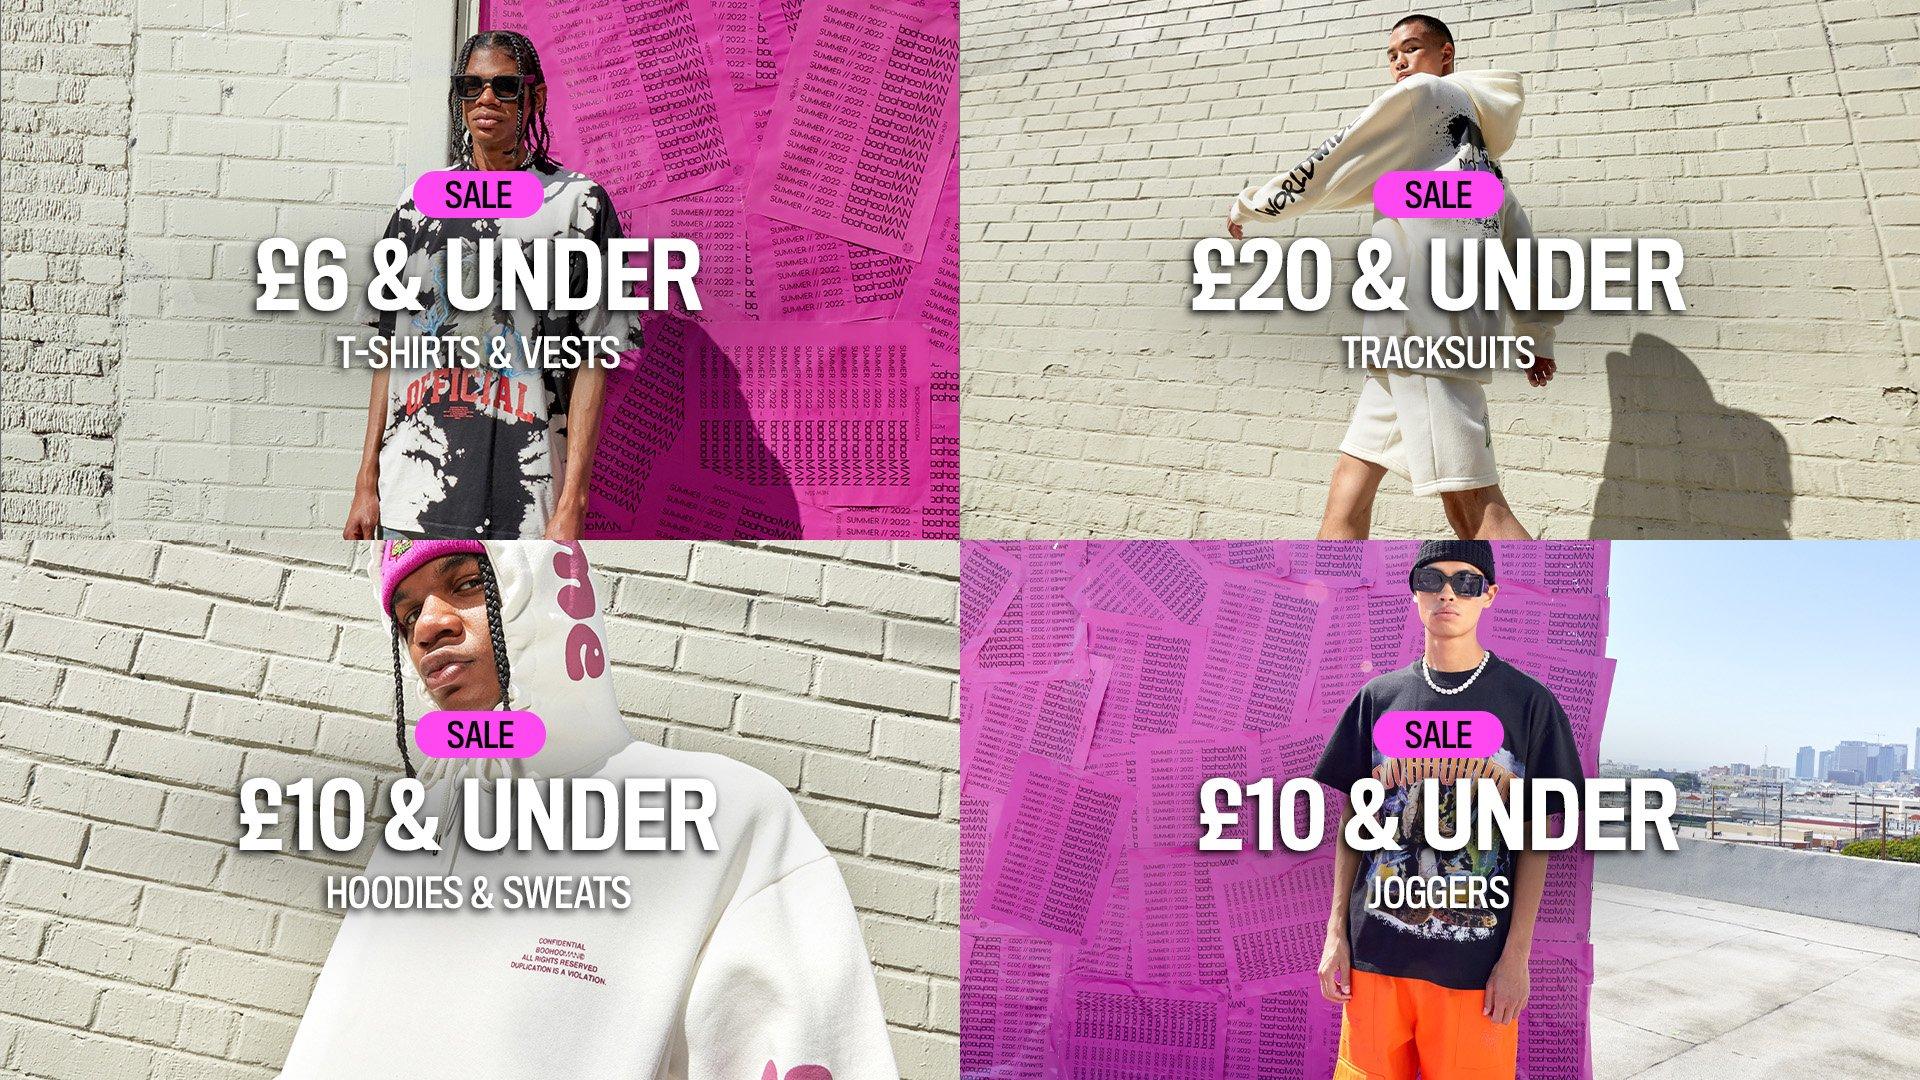 £6 Tshirts, £10 & Under joggers, £20 & Under Tracksuits and £10 & Under Hoodies.